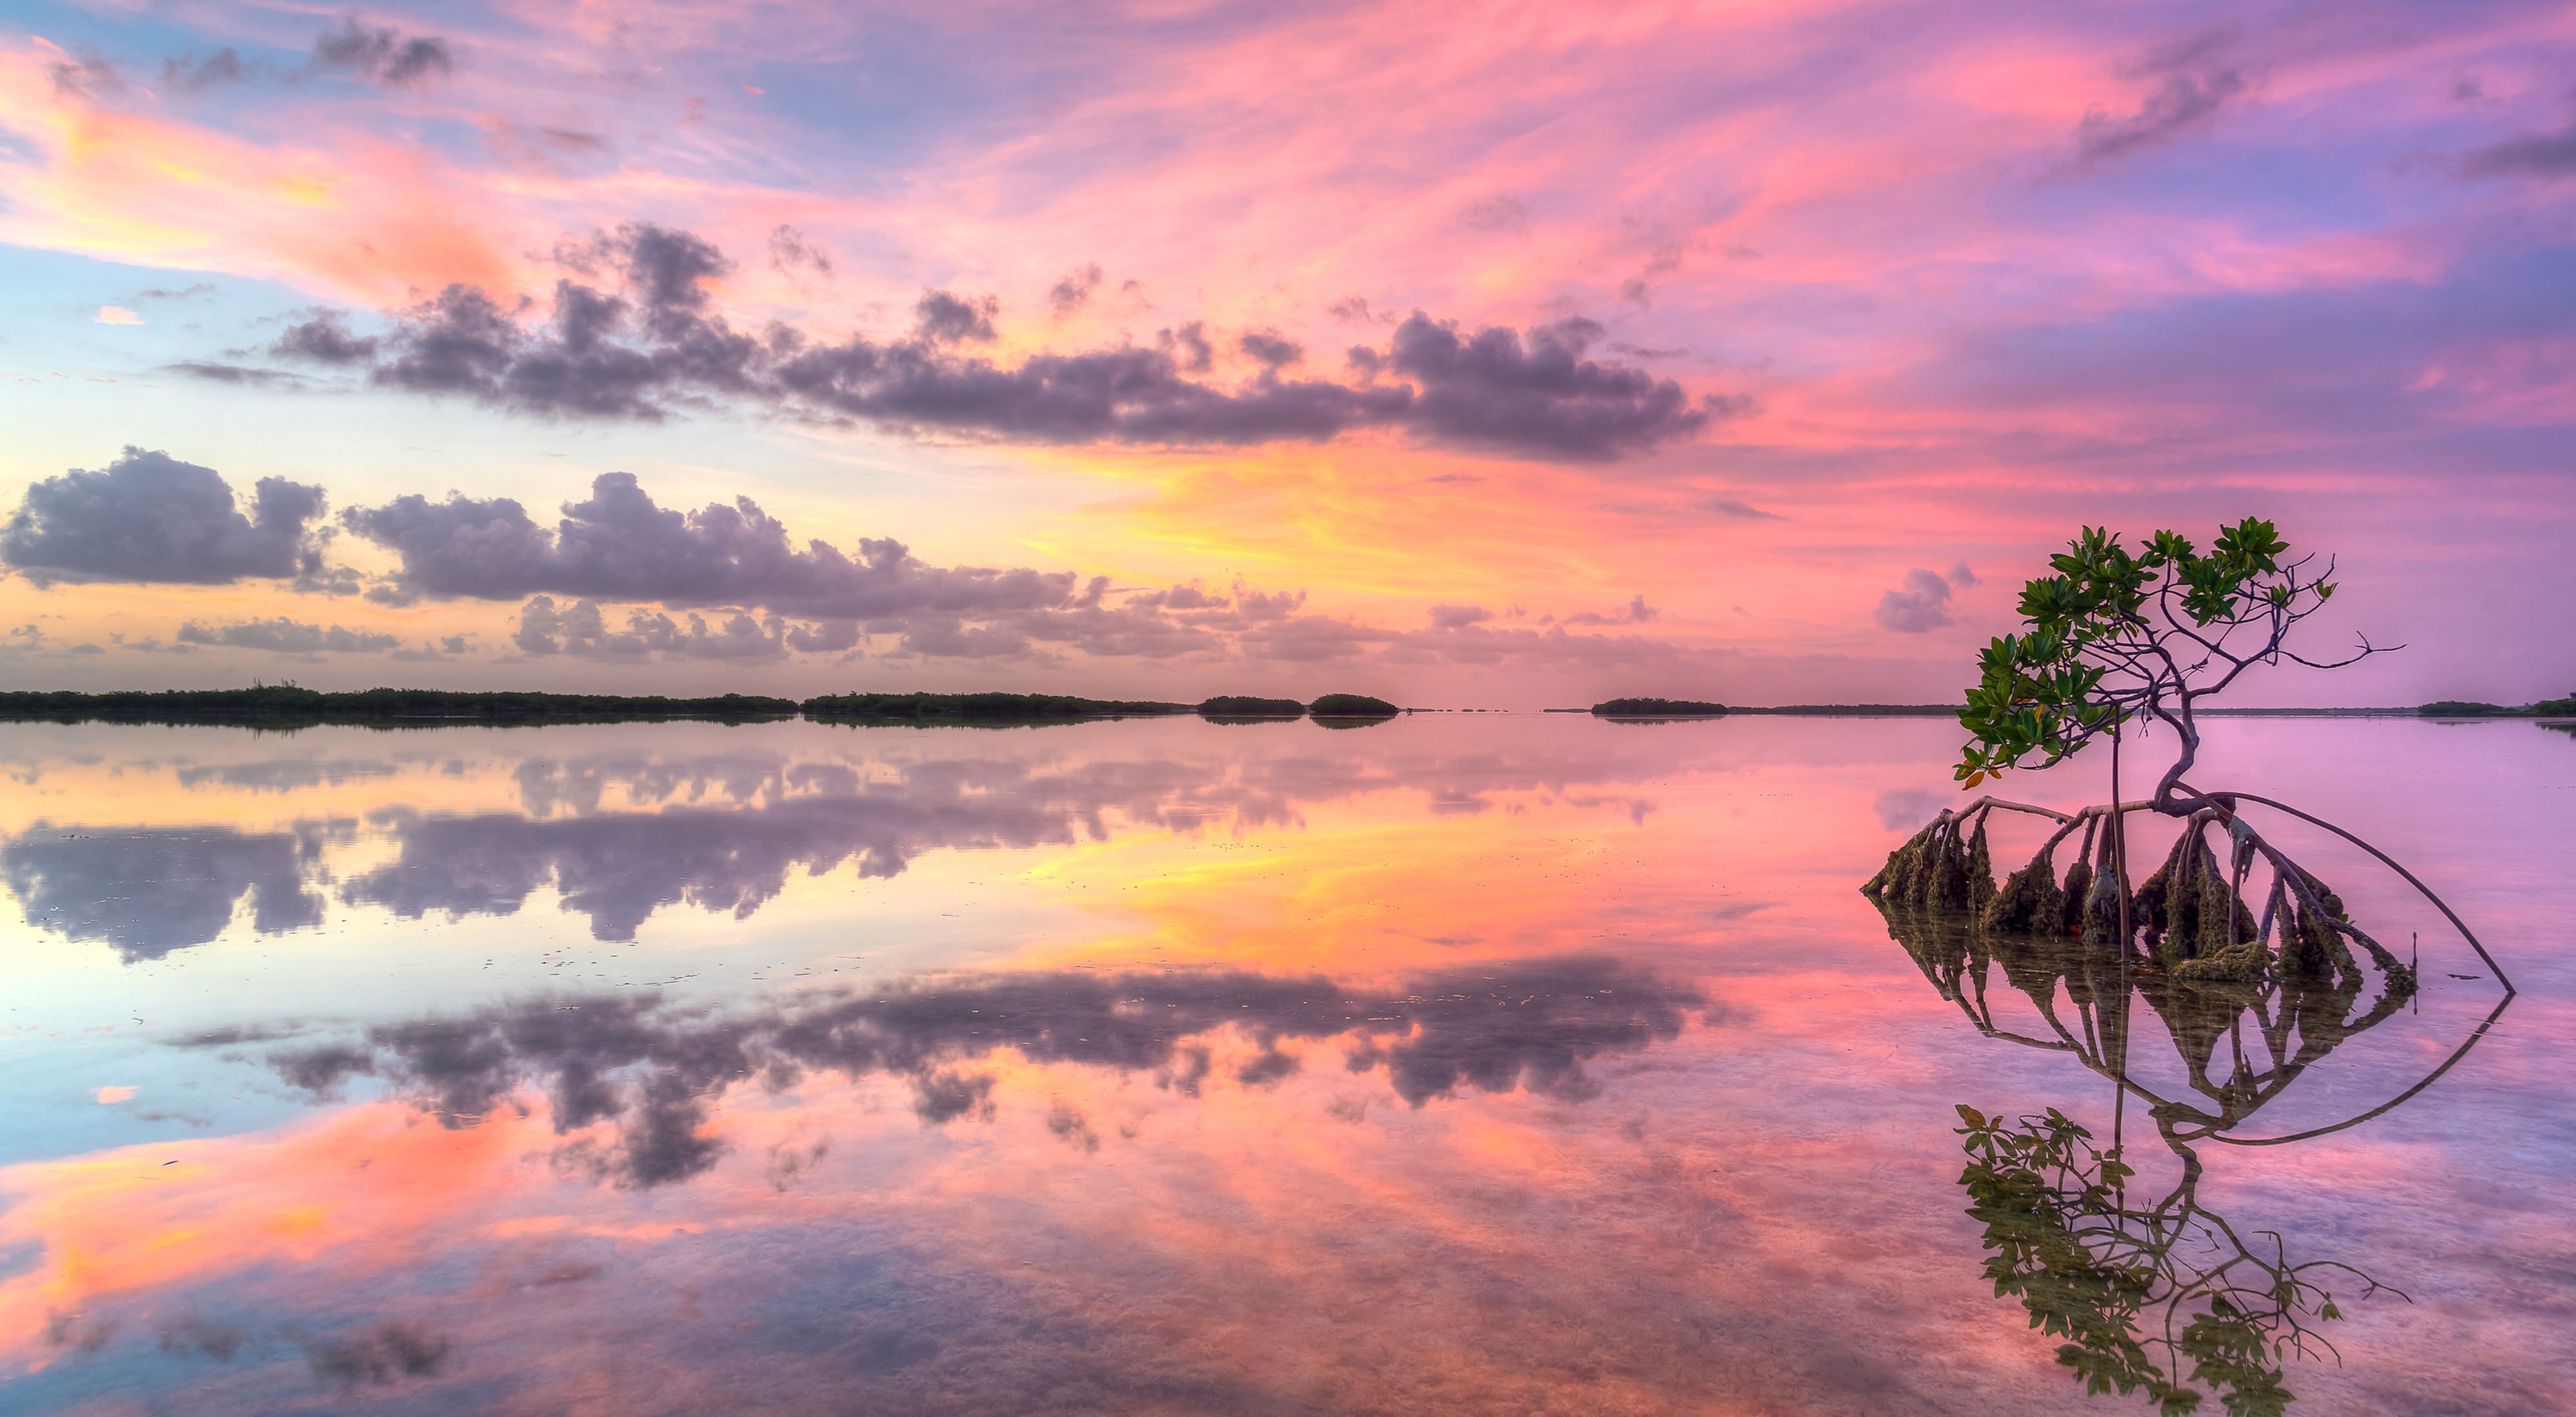 A lone mangrove stands in the foreground, backed by calm flat waters and a pastel sunset.